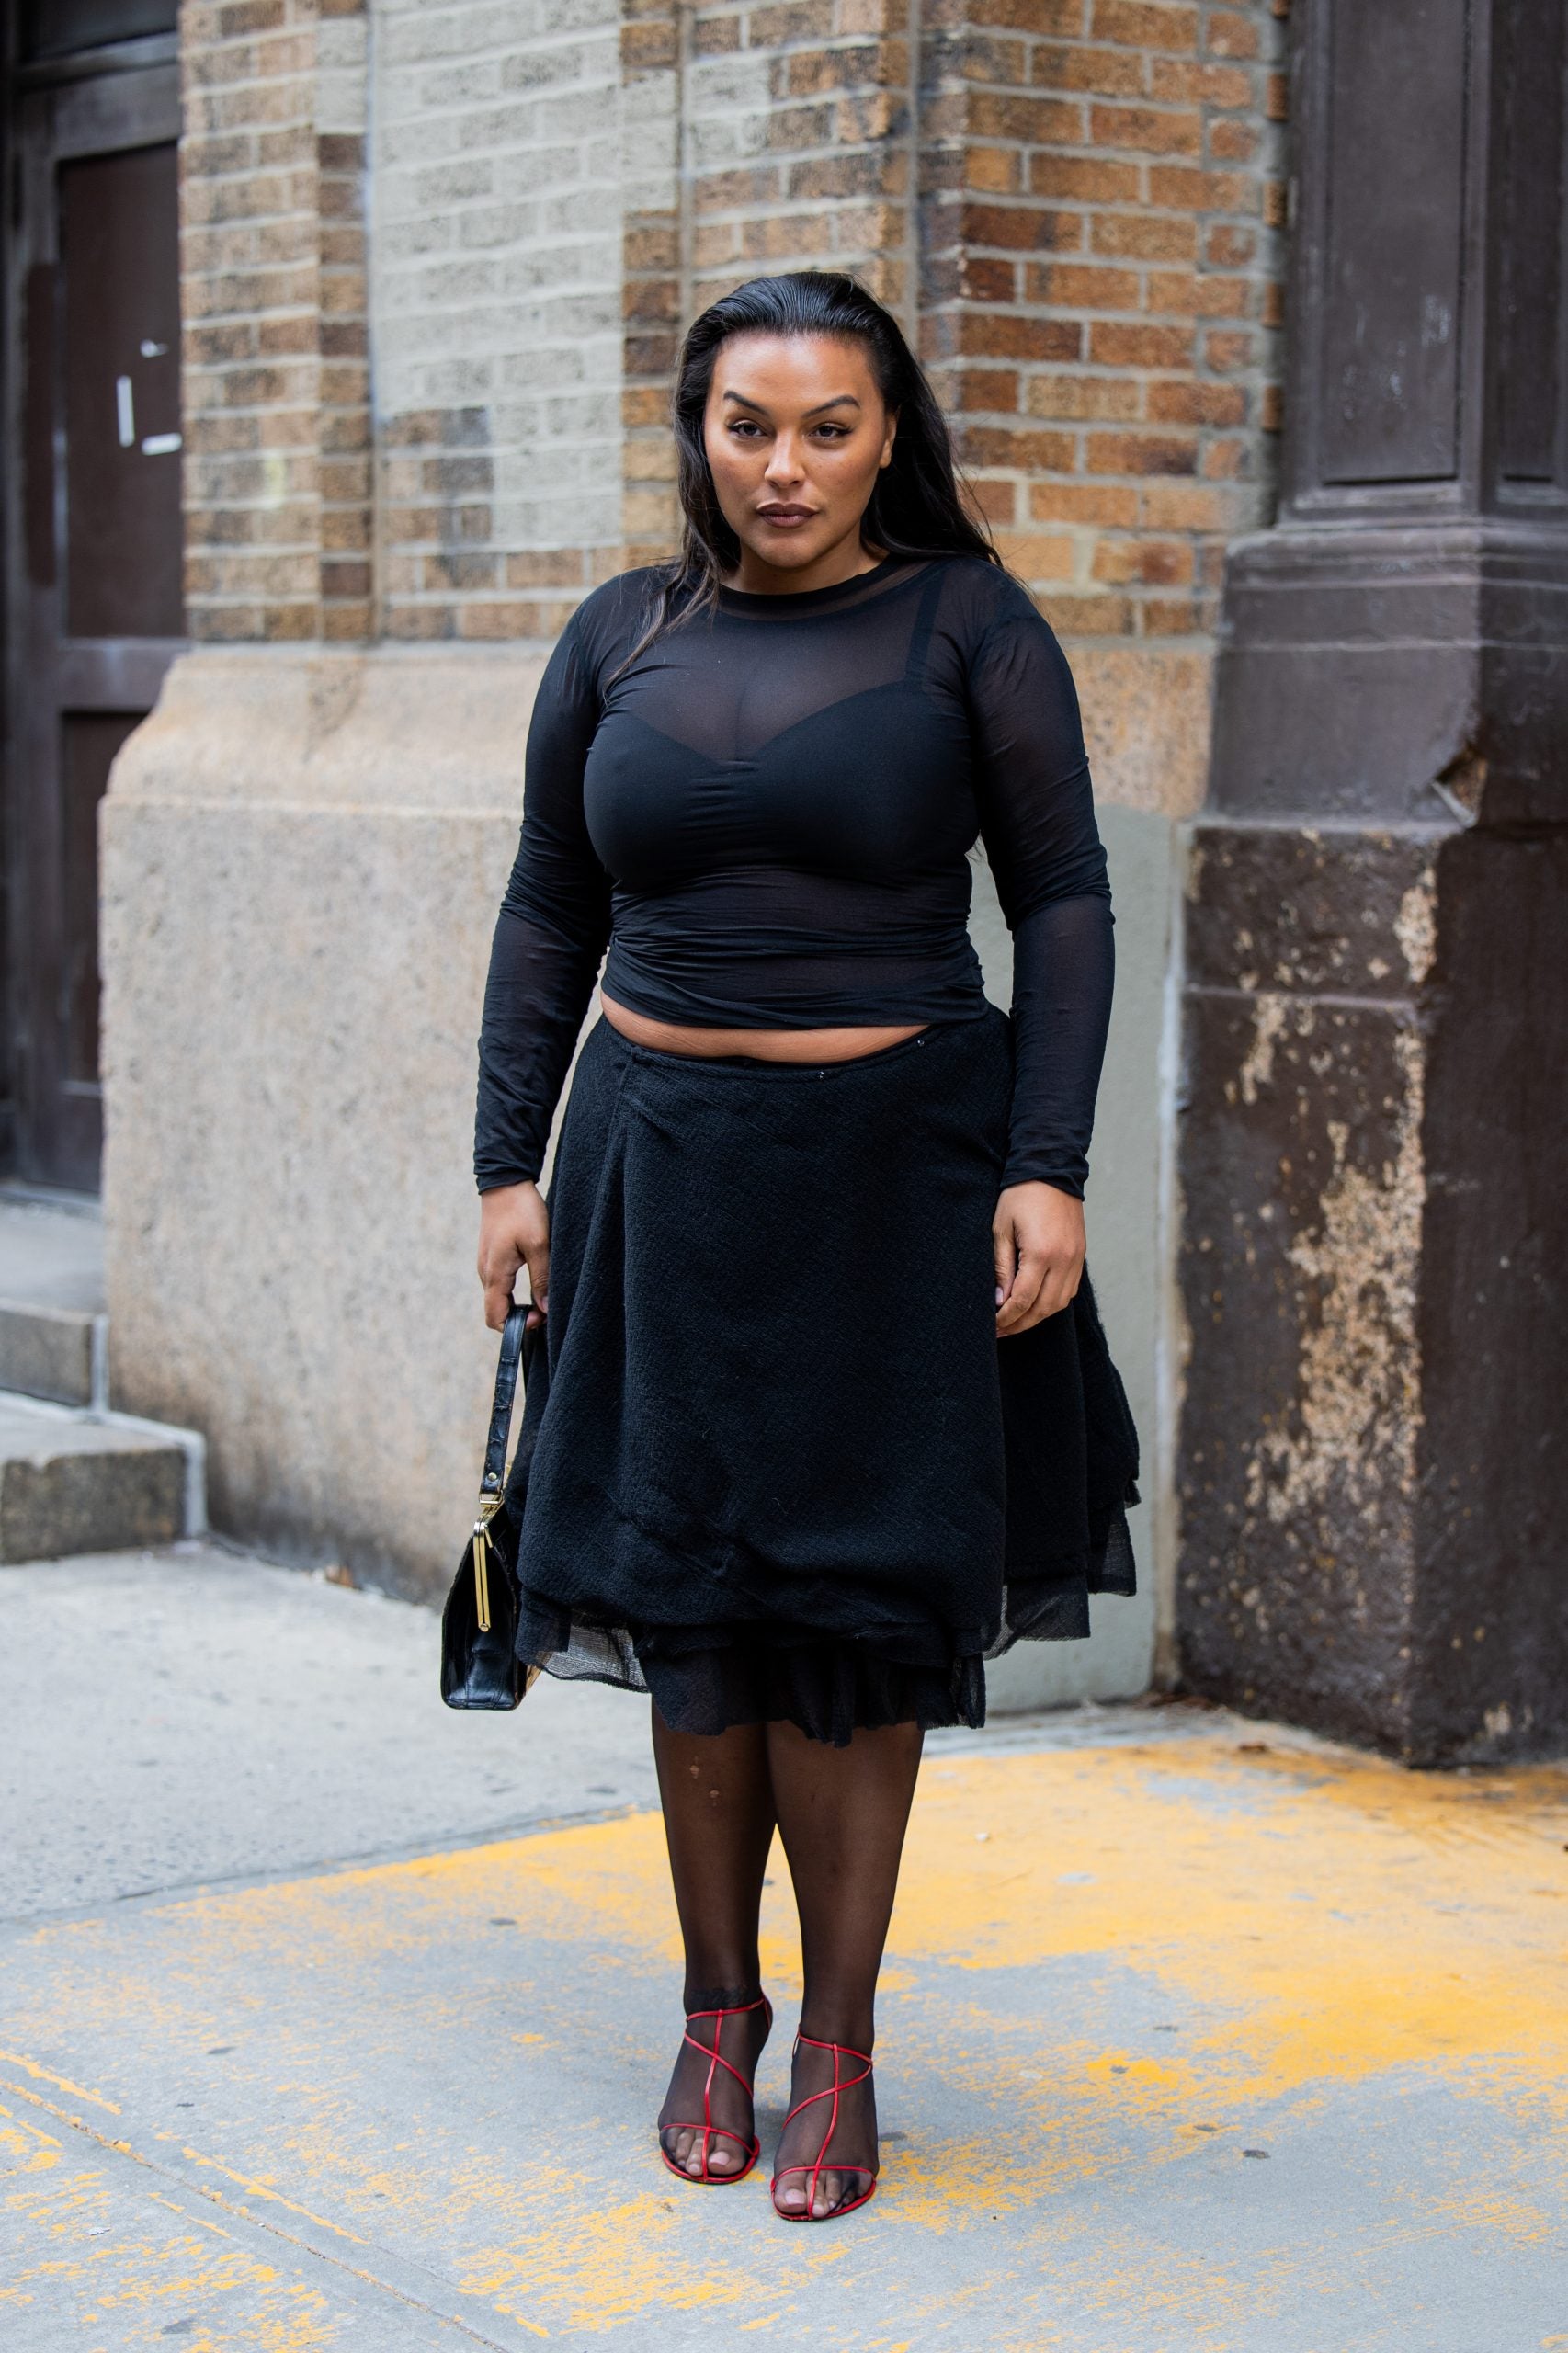 NYFW Celeb Look Of The Day: Day 2, Paloma Elsesser